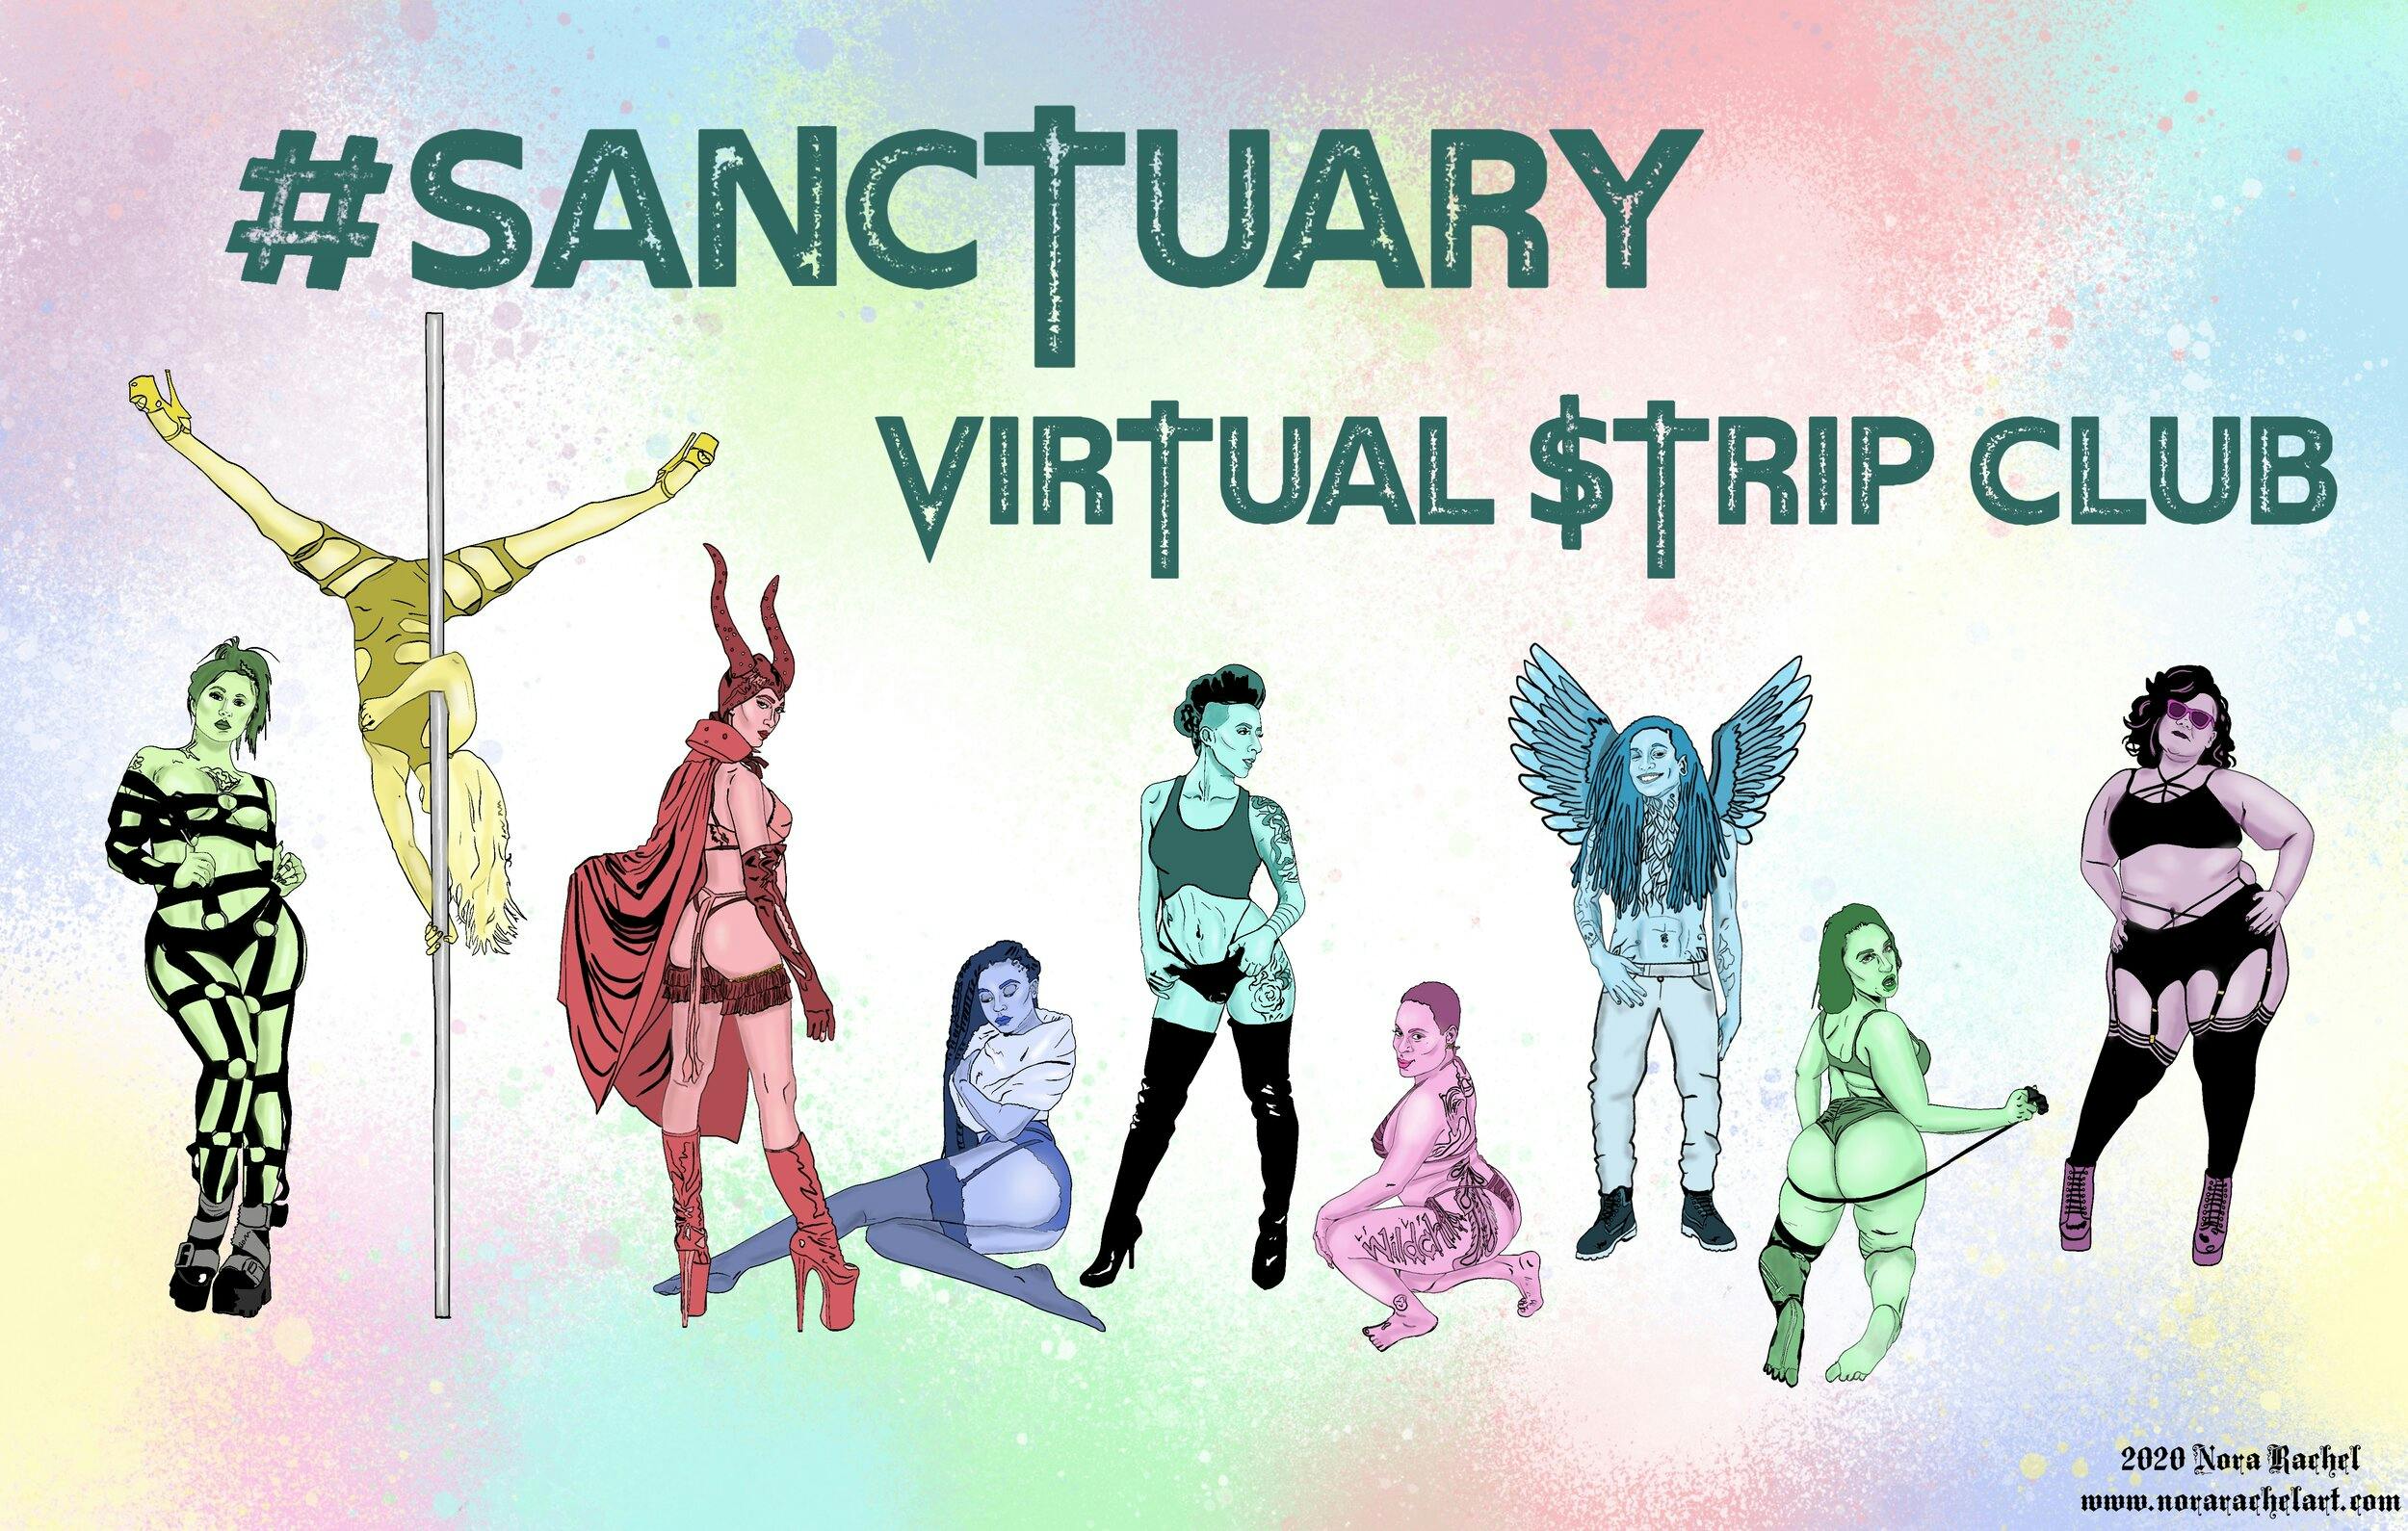 An illustration of nine strippers for SANCTUARY, the virtual strip club.